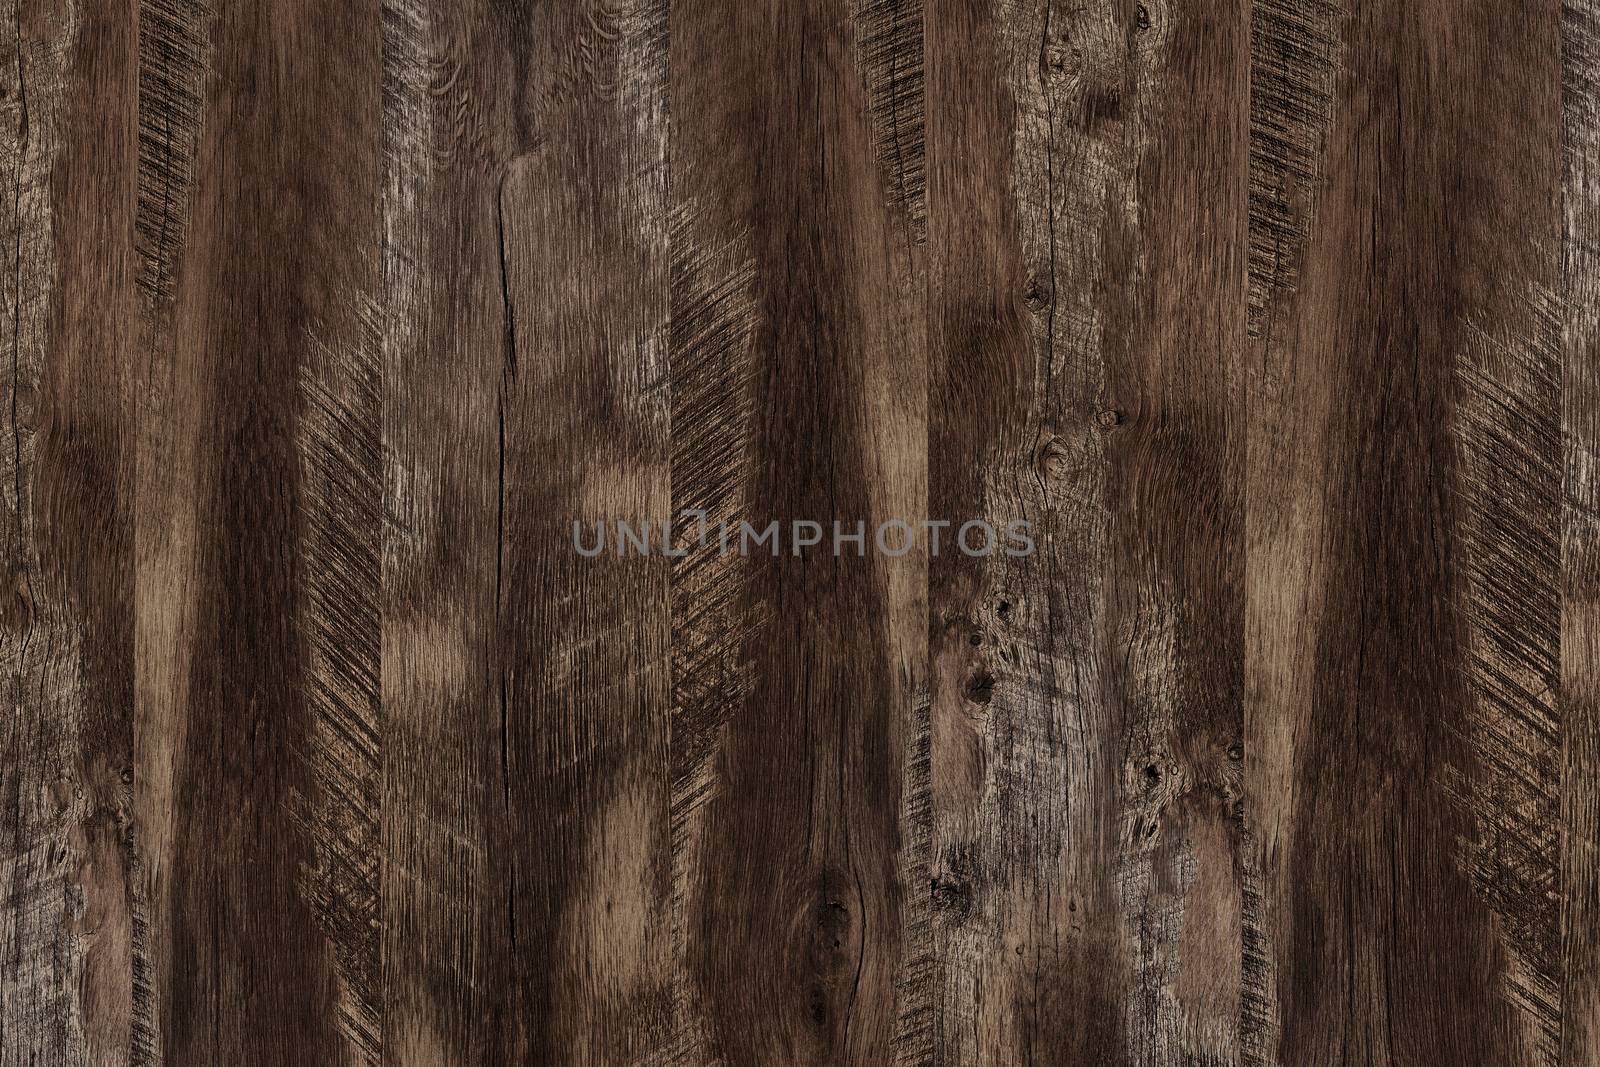 Wood texture with natural patterns, brown wooden texture